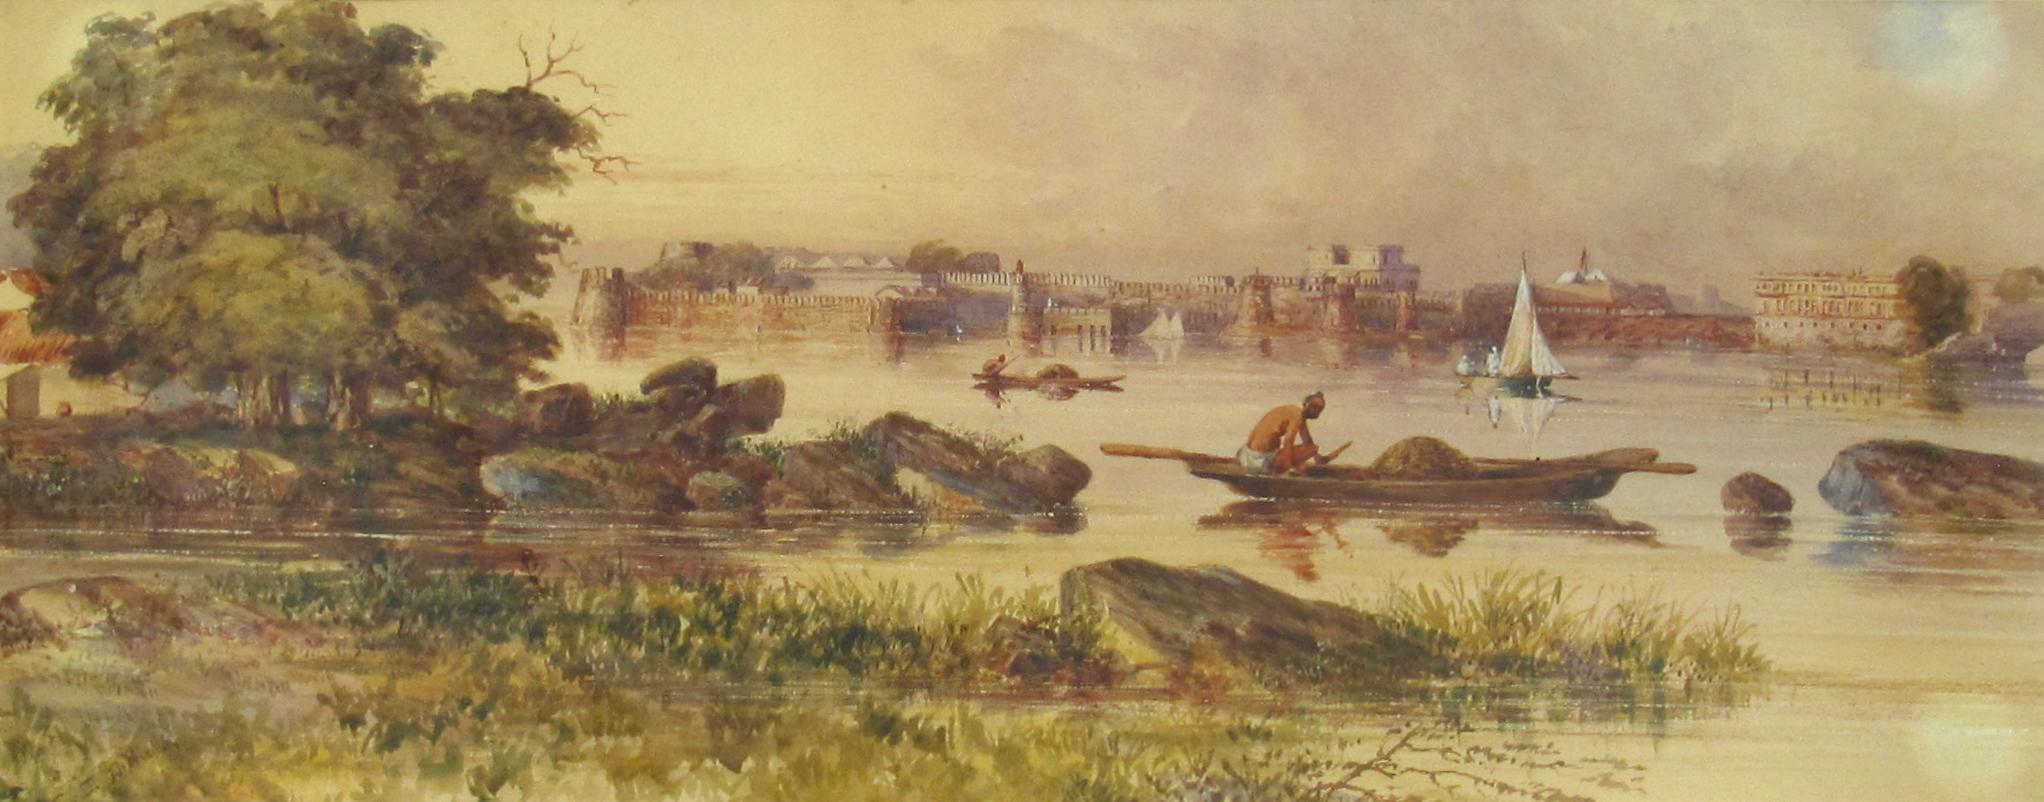 Gangetic Indian Landscape with a Boatmen and Buildings on the banks beyond